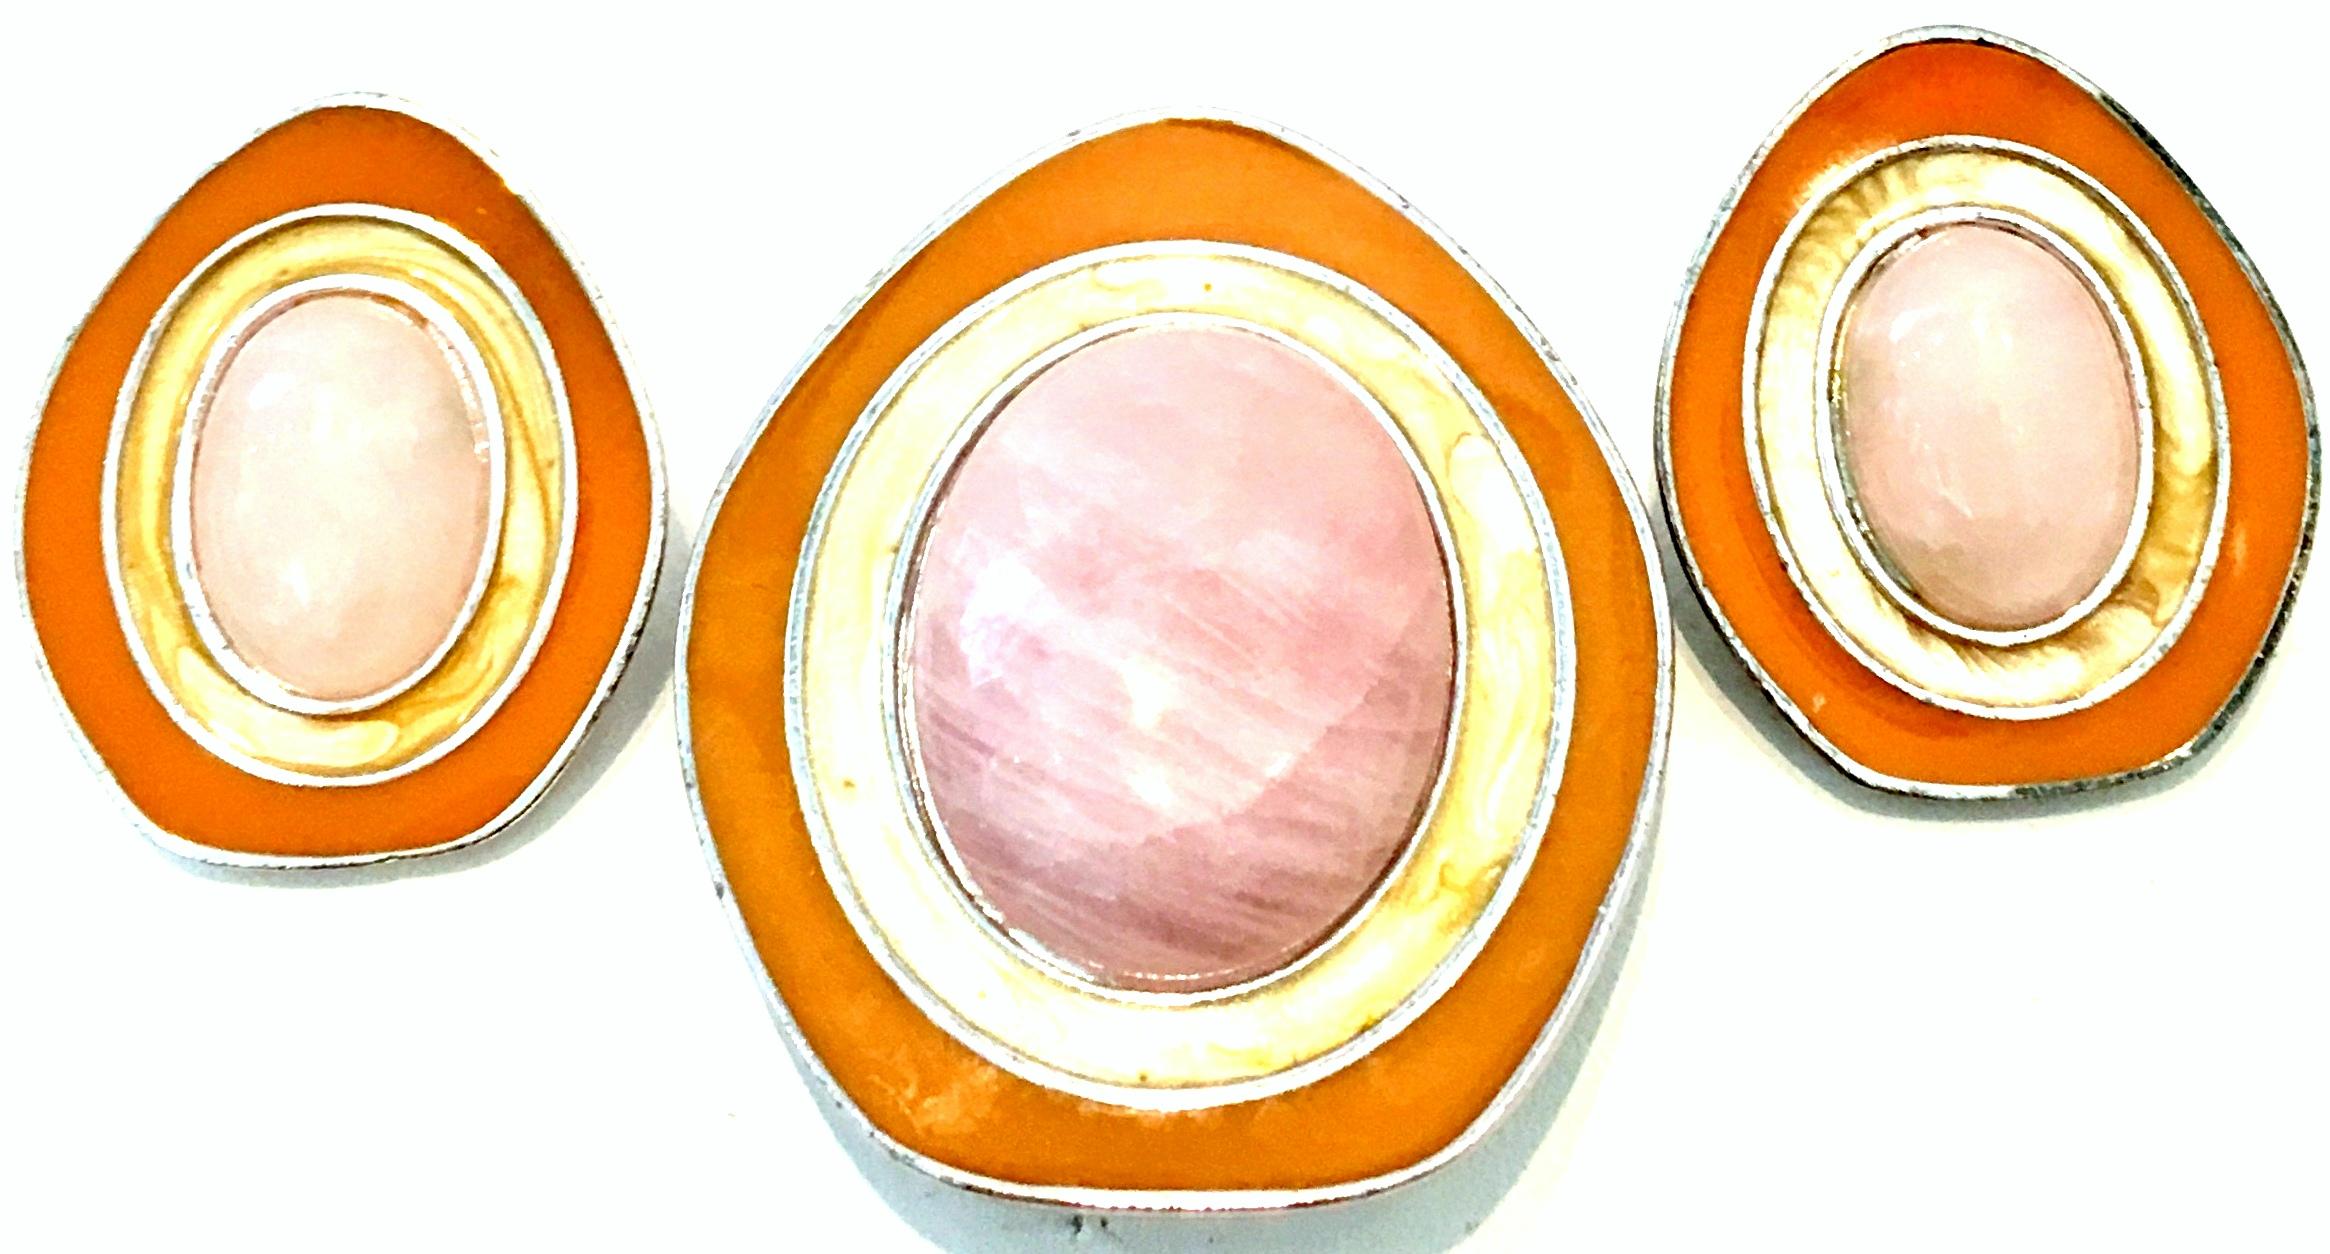 1987 Mod Silver Plate, Rose Quartz & Enamel Dimensional Pair of Earrings & Necklace Pendant/Brooch By, Celia Sebiri for Avon. This iconic and coveted geometric modern designed three piece set features silver plate metal with orange and yellow enamel